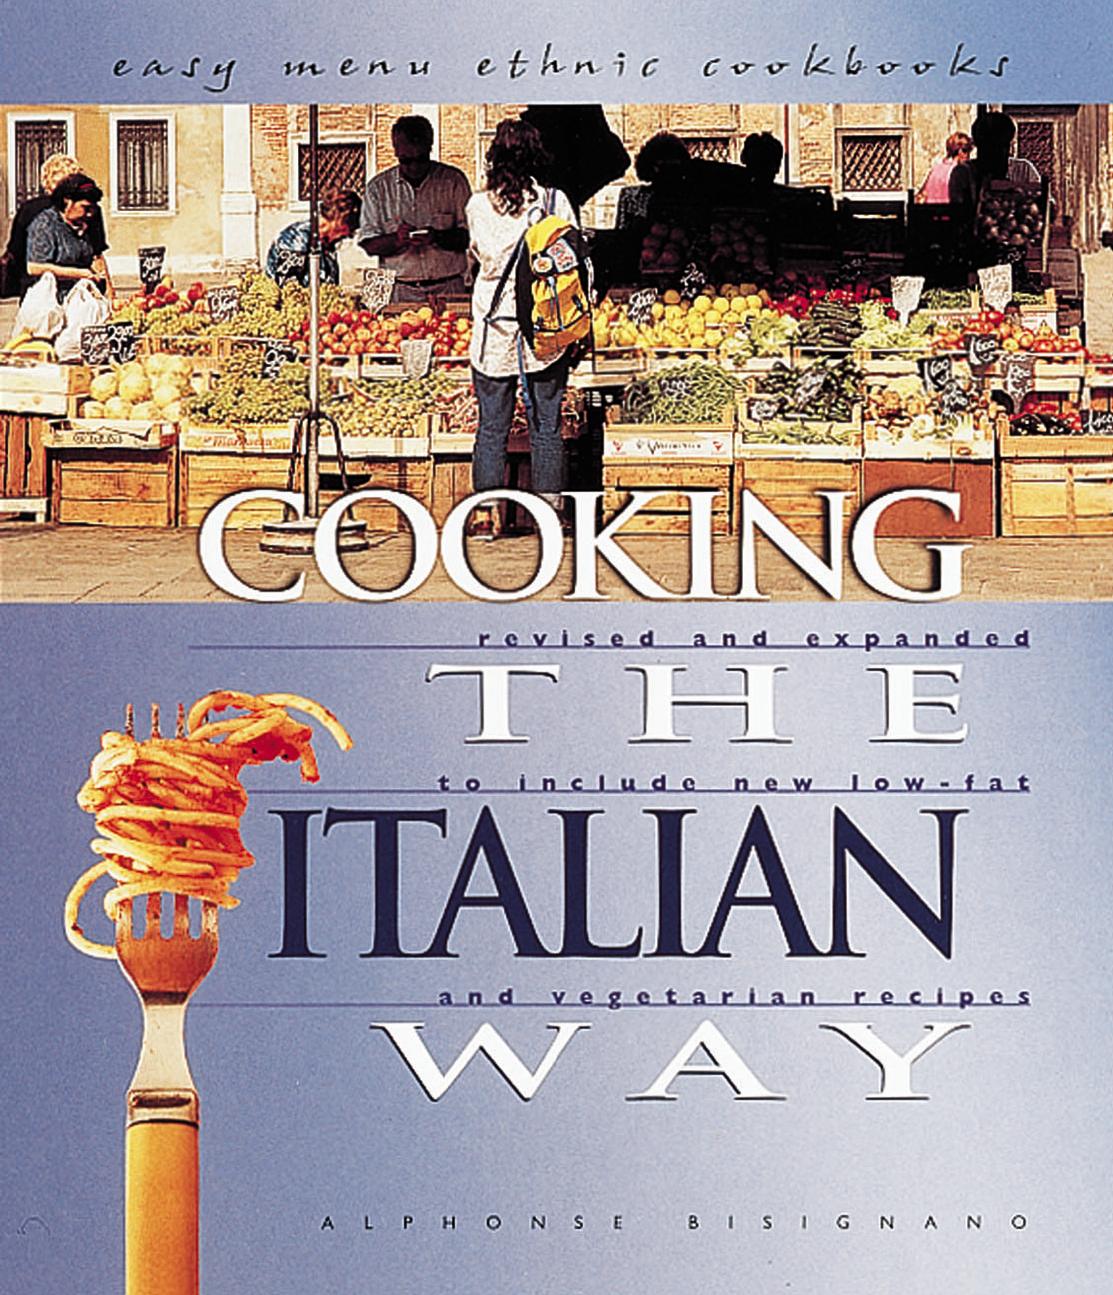 Cooking the Italian Way by Alphonse Bisignano